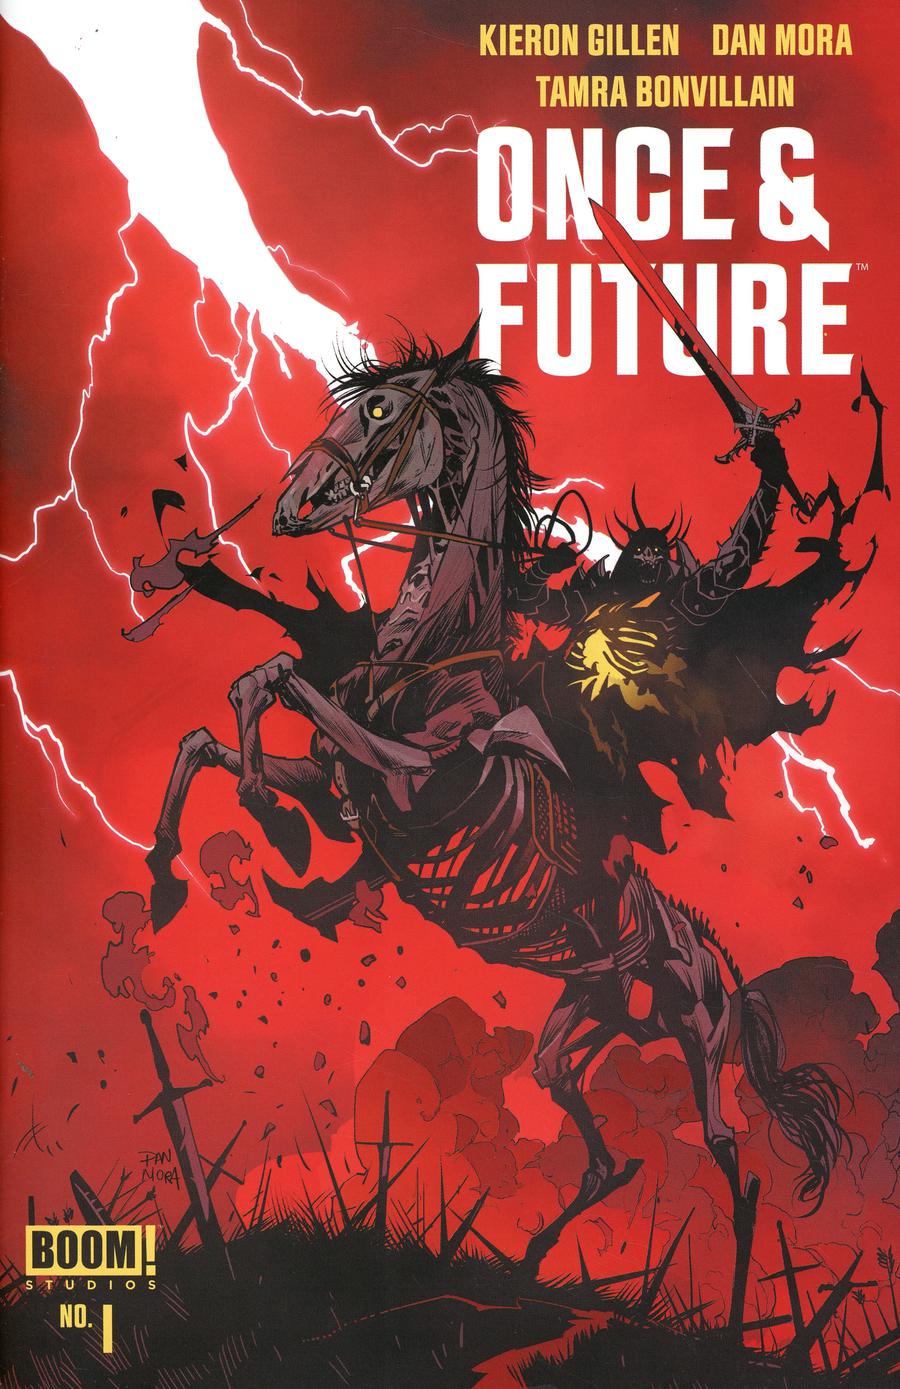 Once & Future #1 (3rd Printing) (Of 6)